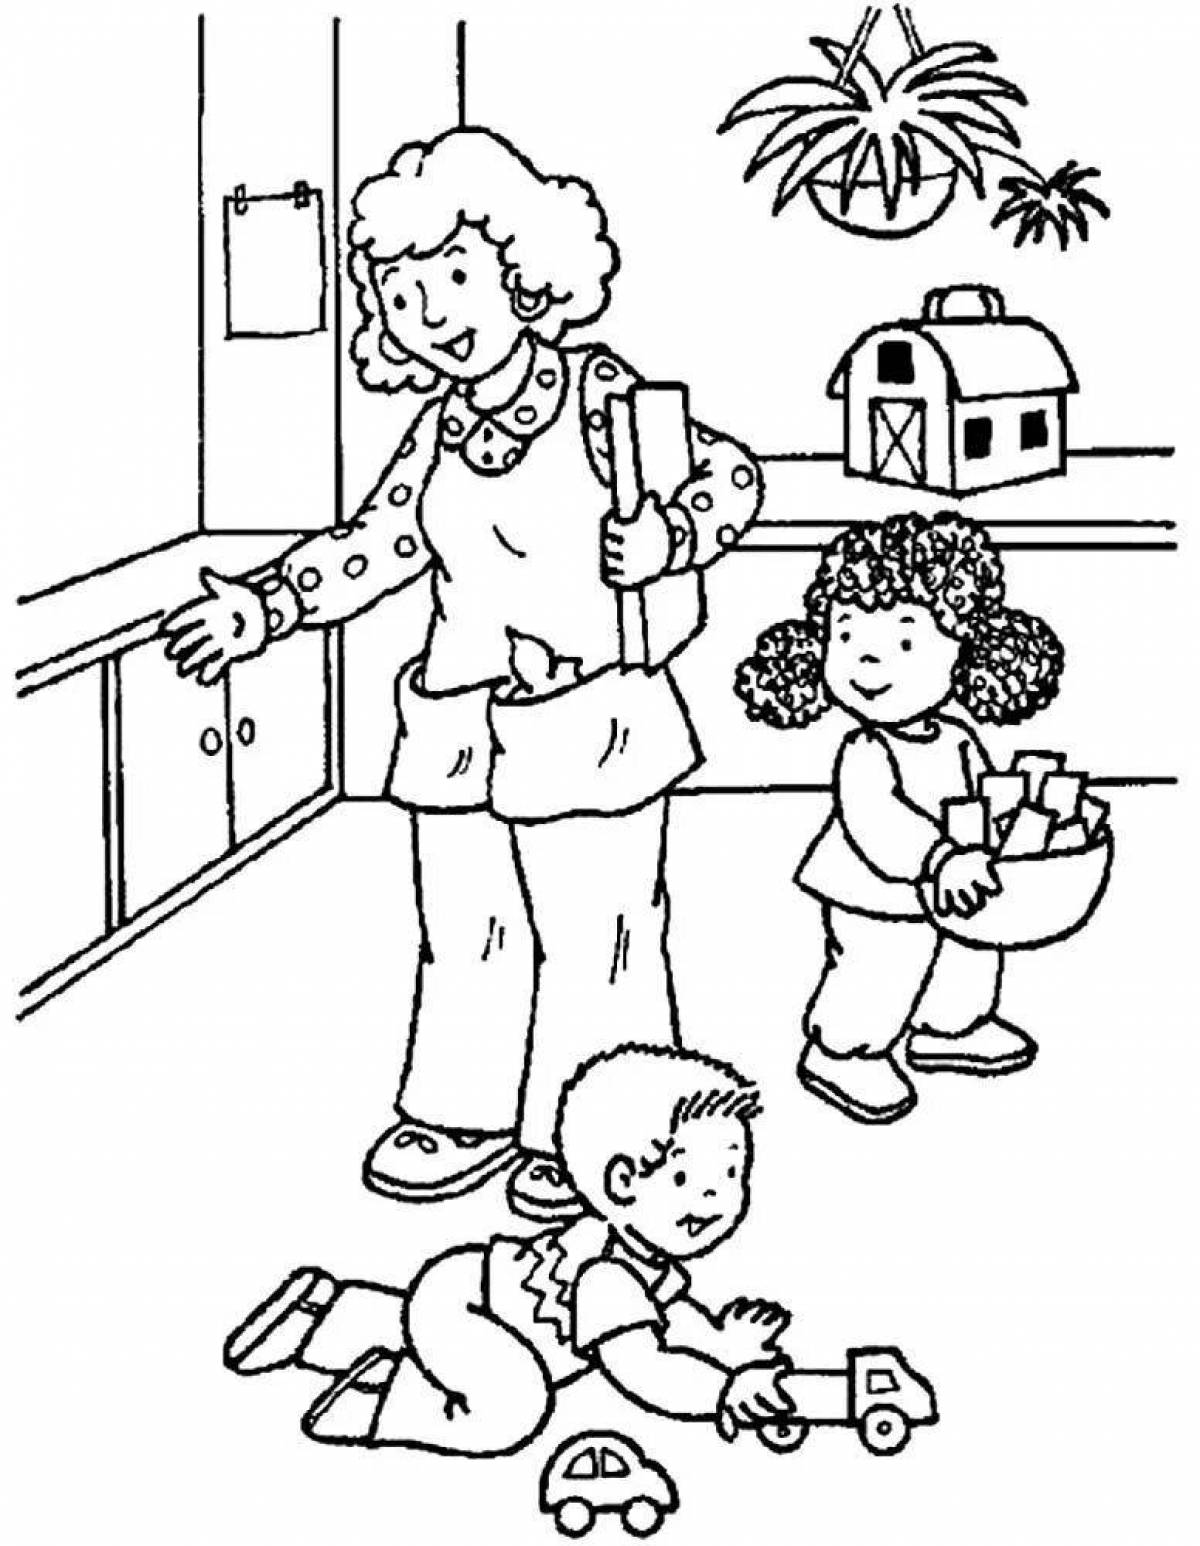 Color-frenzy coloring page детский сад